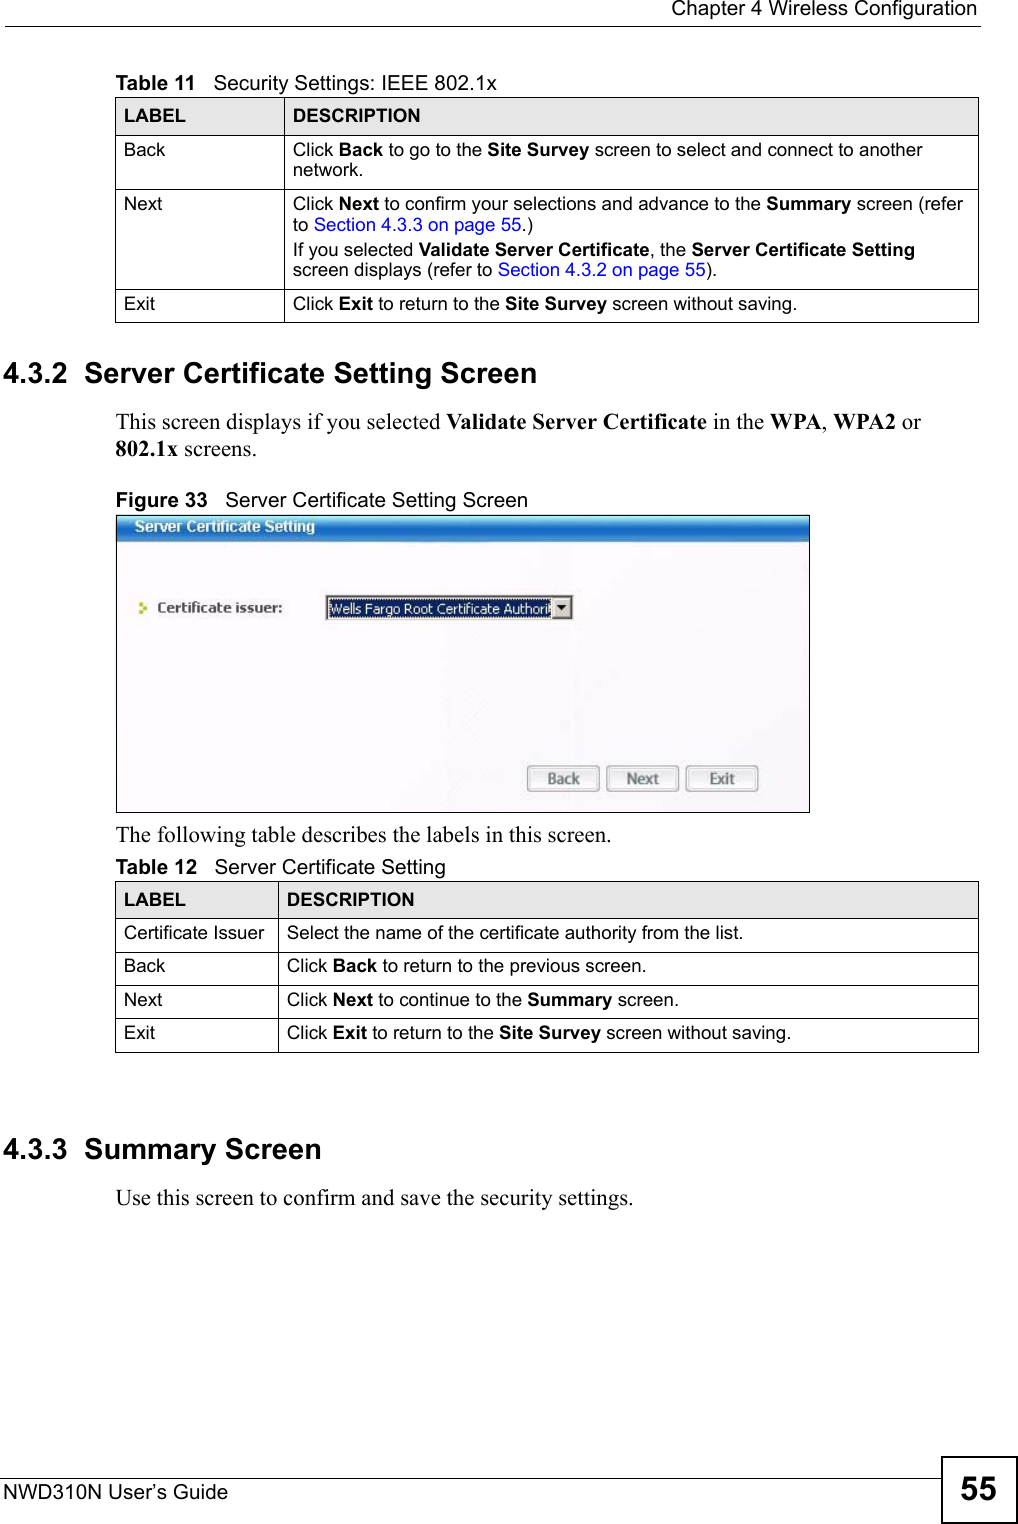  Chapter 4 Wireless ConfigurationNWD310N User’s Guide 554.3.2  Server Certificate Setting ScreenThis screen displays if you selected Validate Server Certificate in the WPA, WPA2 or 802.1x screens.Figure 33   Server Certificate Setting ScreenThe following table describes the labels in this screen.4.3.3  Summary ScreenUse this screen to confirm and save the security settings.Back Click Back to go to the Site Survey screen to select and connect to another network.Next Click Next to confirm your selections and advance to the Summary screen (refer to Section 4.3.3 on page 55.) If you selected Validate Server Certificate, the Server Certificate Setting screen displays (refer to Section 4.3.2 on page 55).Exit Click Exit to return to the Site Survey screen without saving.Table 11   Security Settings: IEEE 802.1xLABEL DESCRIPTIONTable 12   Server Certificate SettingLABEL DESCRIPTIONCertificate Issuer Select the name of the certificate authority from the list.Back Click Back to return to the previous screen.Next Click Next to continue to the Summary screen.Exit Click Exit to return to the Site Survey screen without saving.